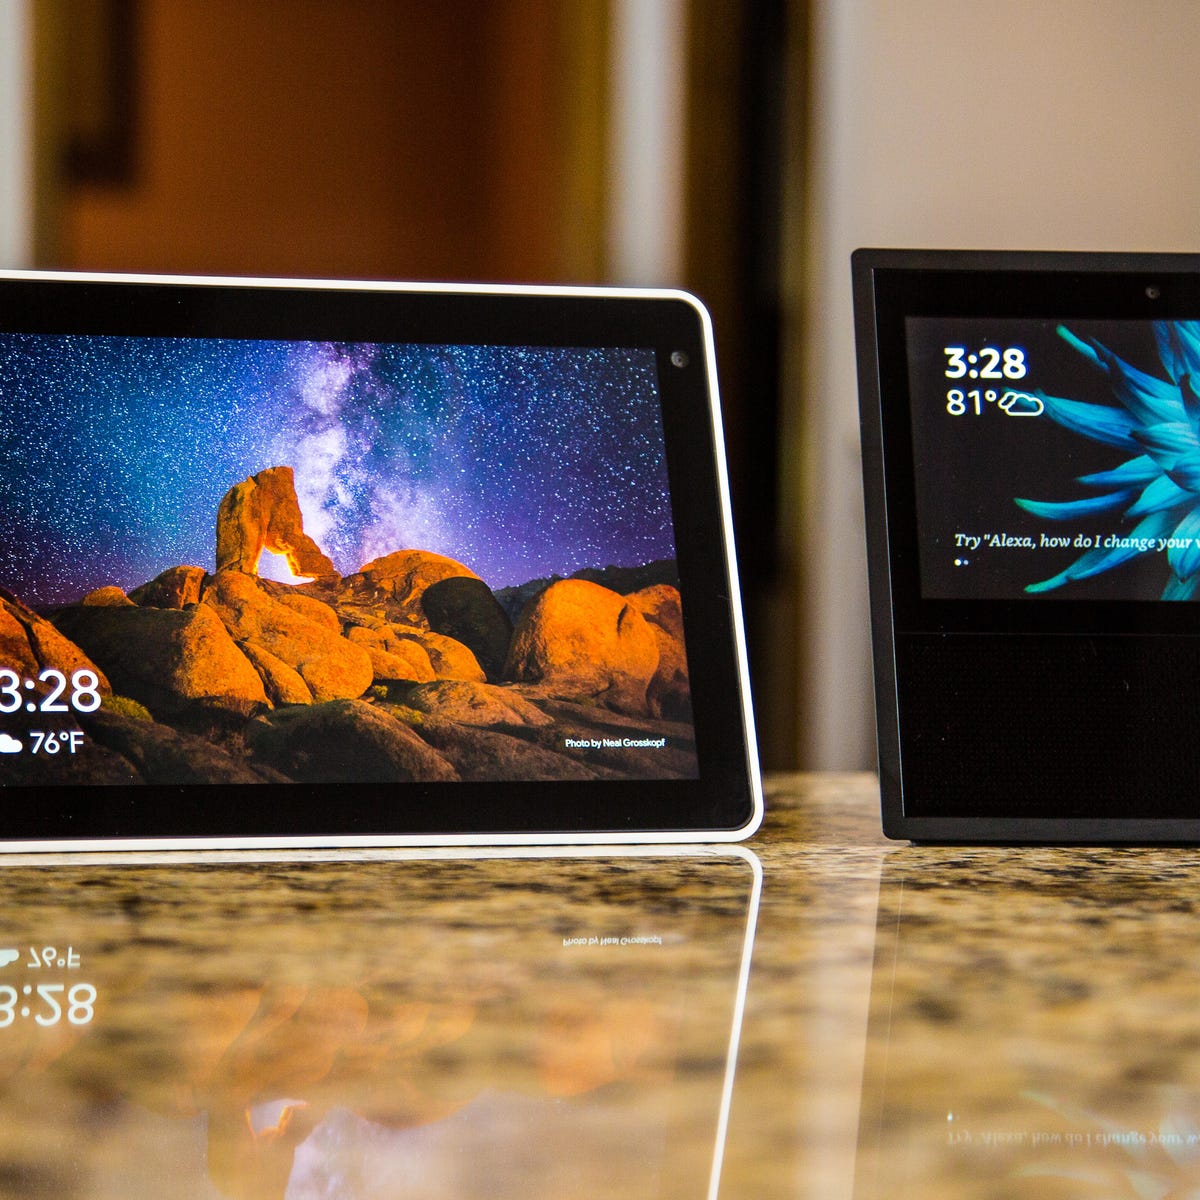 Echo Show 8 review: The best Alexa smart display, period - CNET